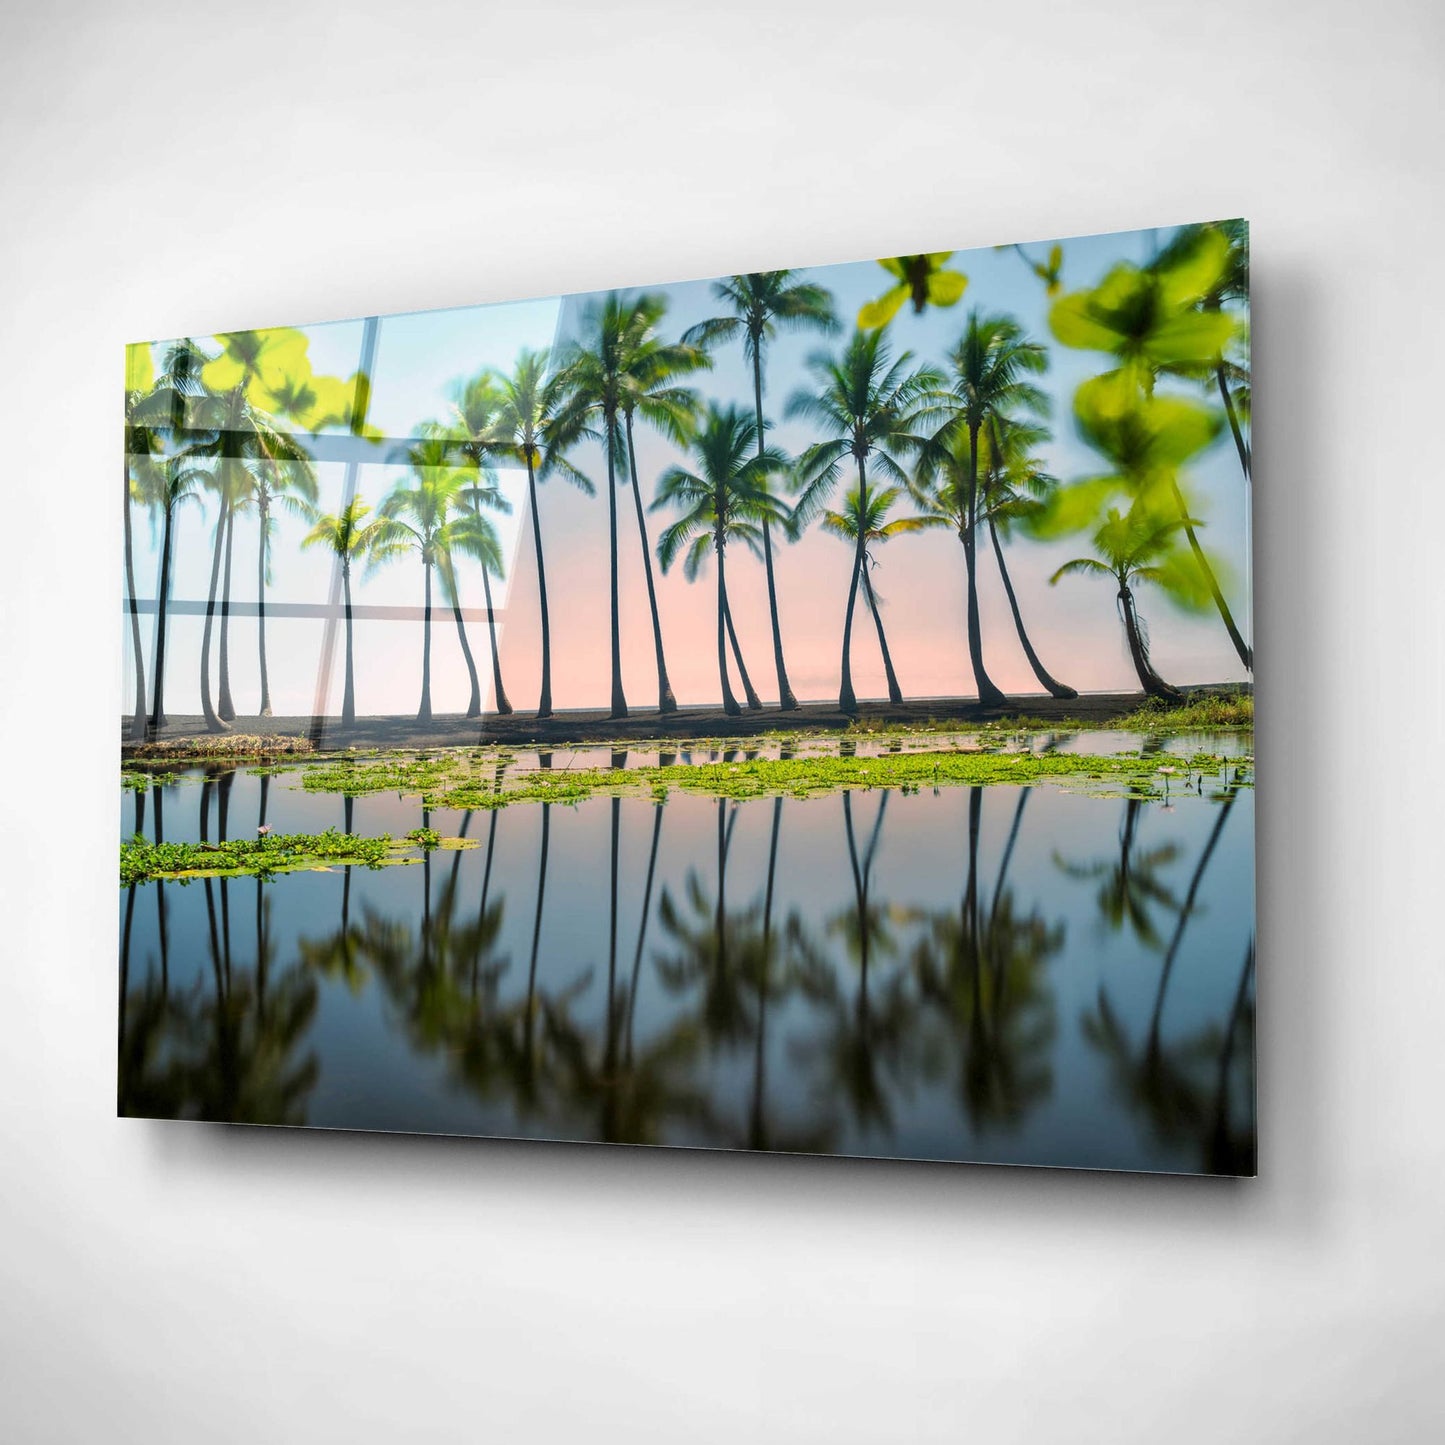 Epic Art 'Palm Tree Reflections' by Dennis Frates, Acrylic Glass Wall Art,16x12